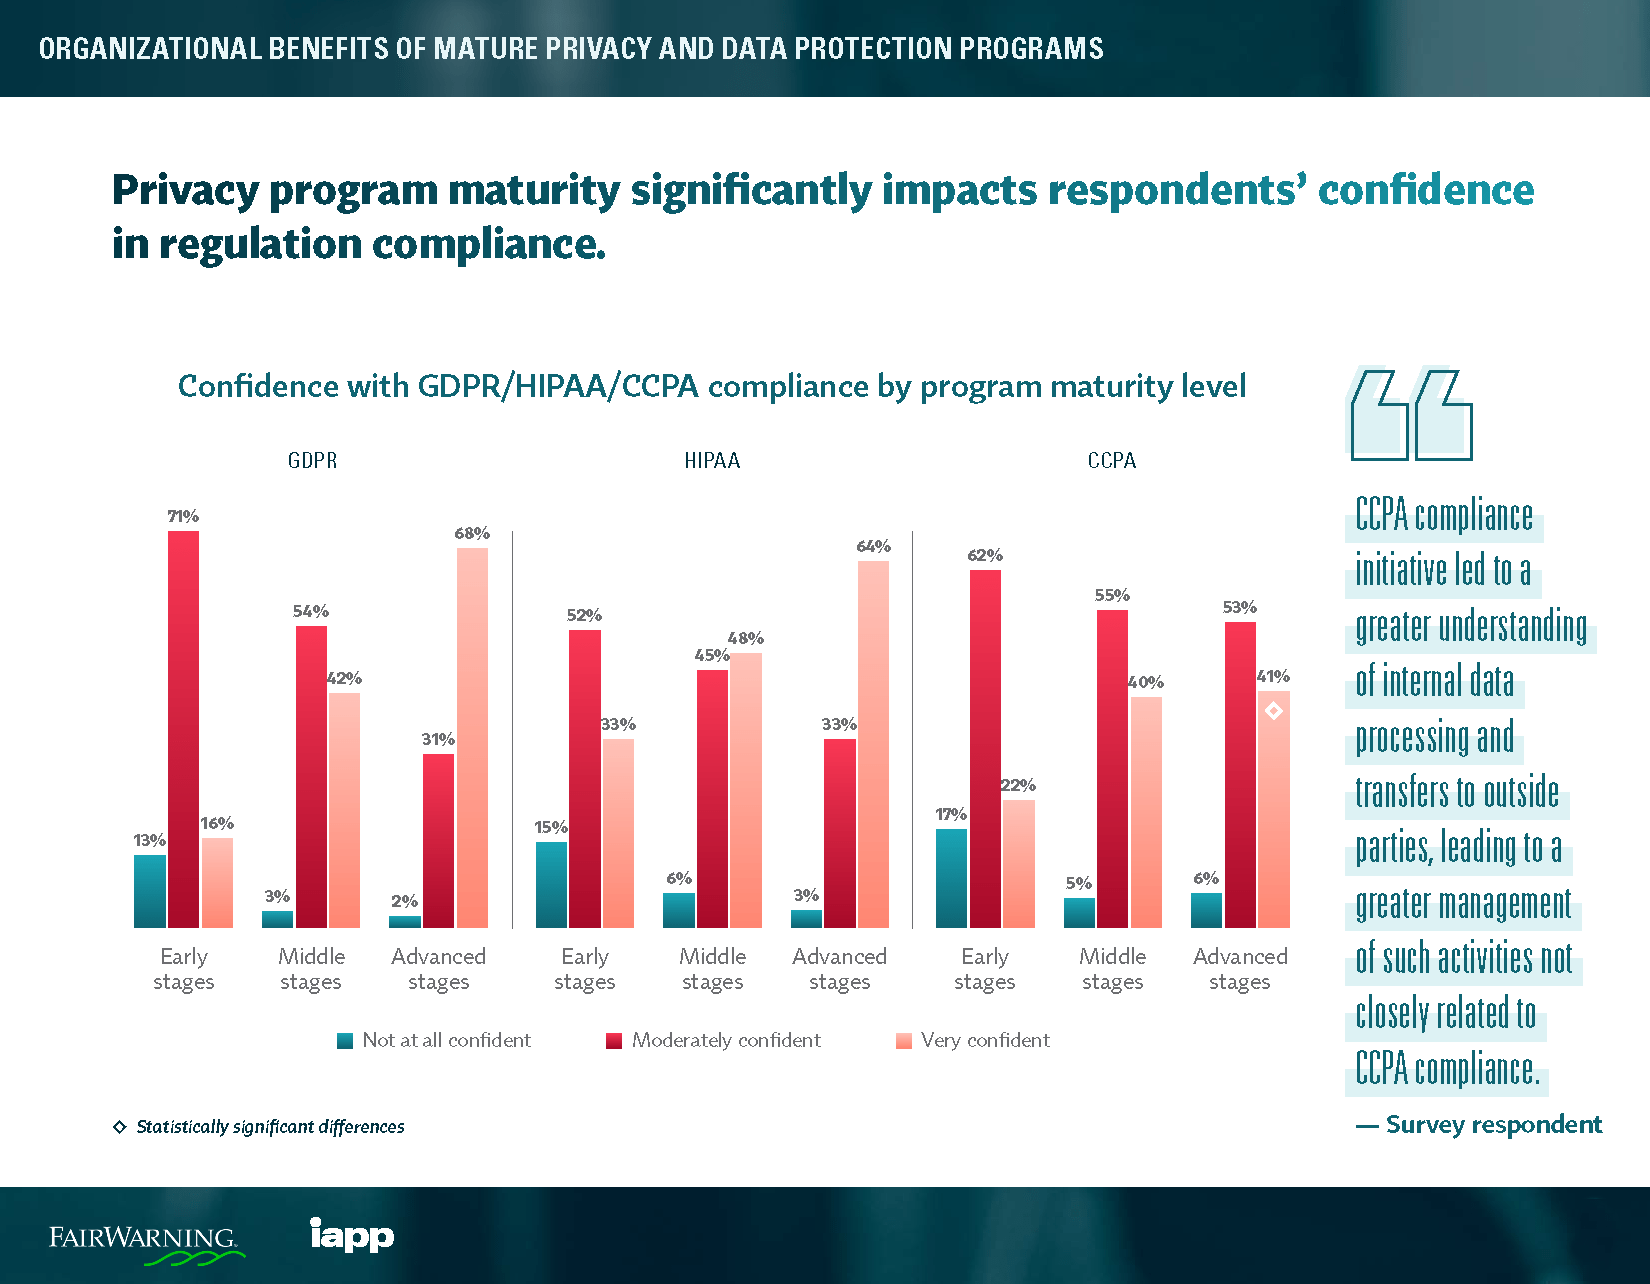 Chart showing confidence in GDPR, HIPAA, and CCPA compliance by program maturity level.